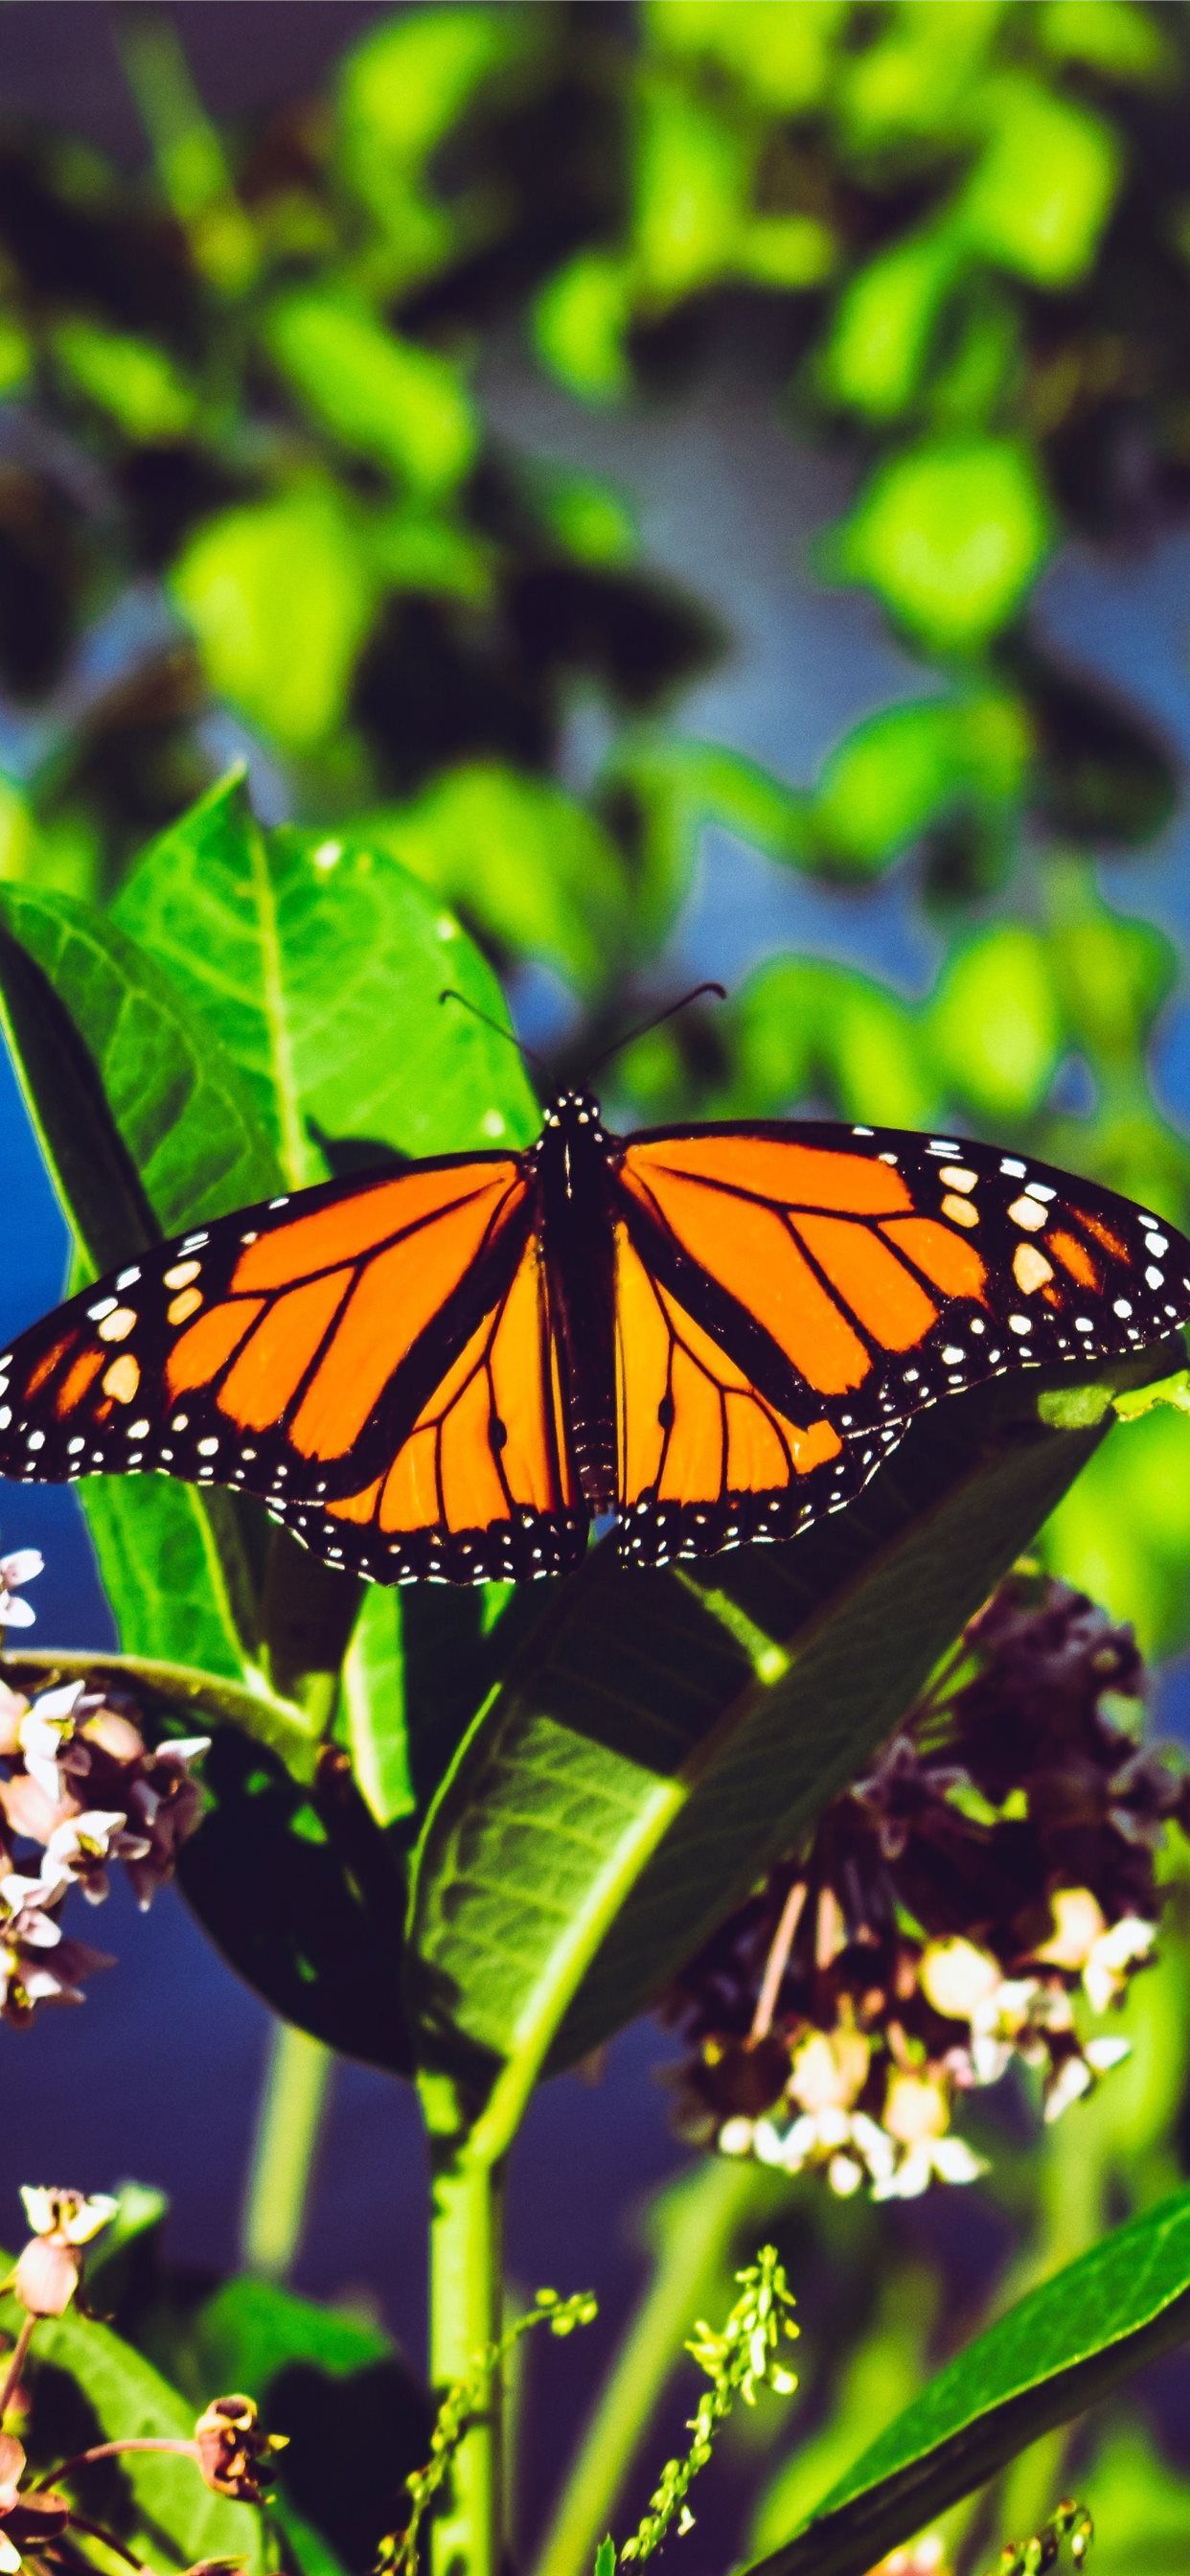 A monarch butterfly sitting on a leaf. - Butterfly